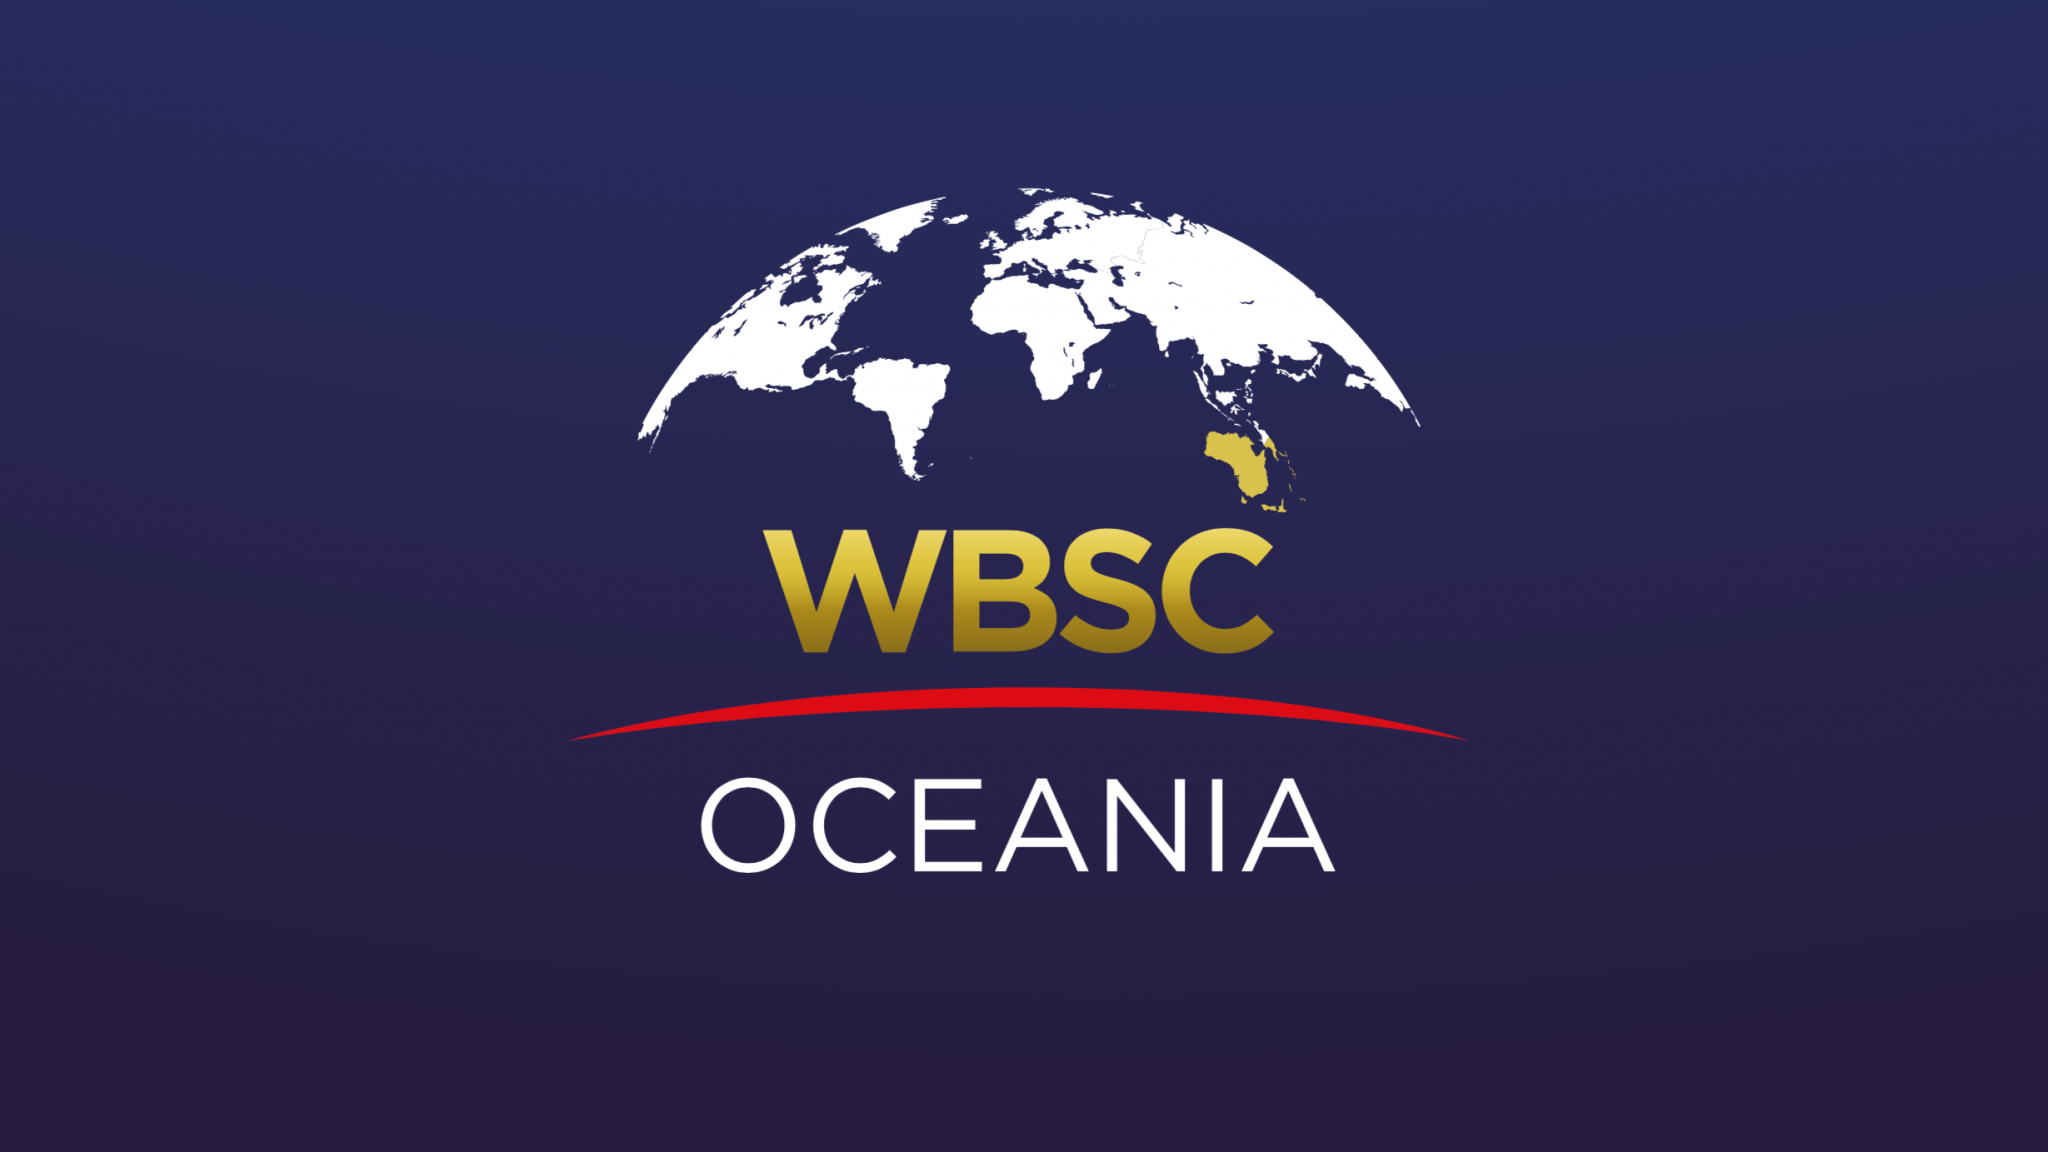 WBSC Oceania has been launched following the historic merger of the Baseball Confederation of Oceania and the Oceania Softball Confederation ©WBSC Oceania